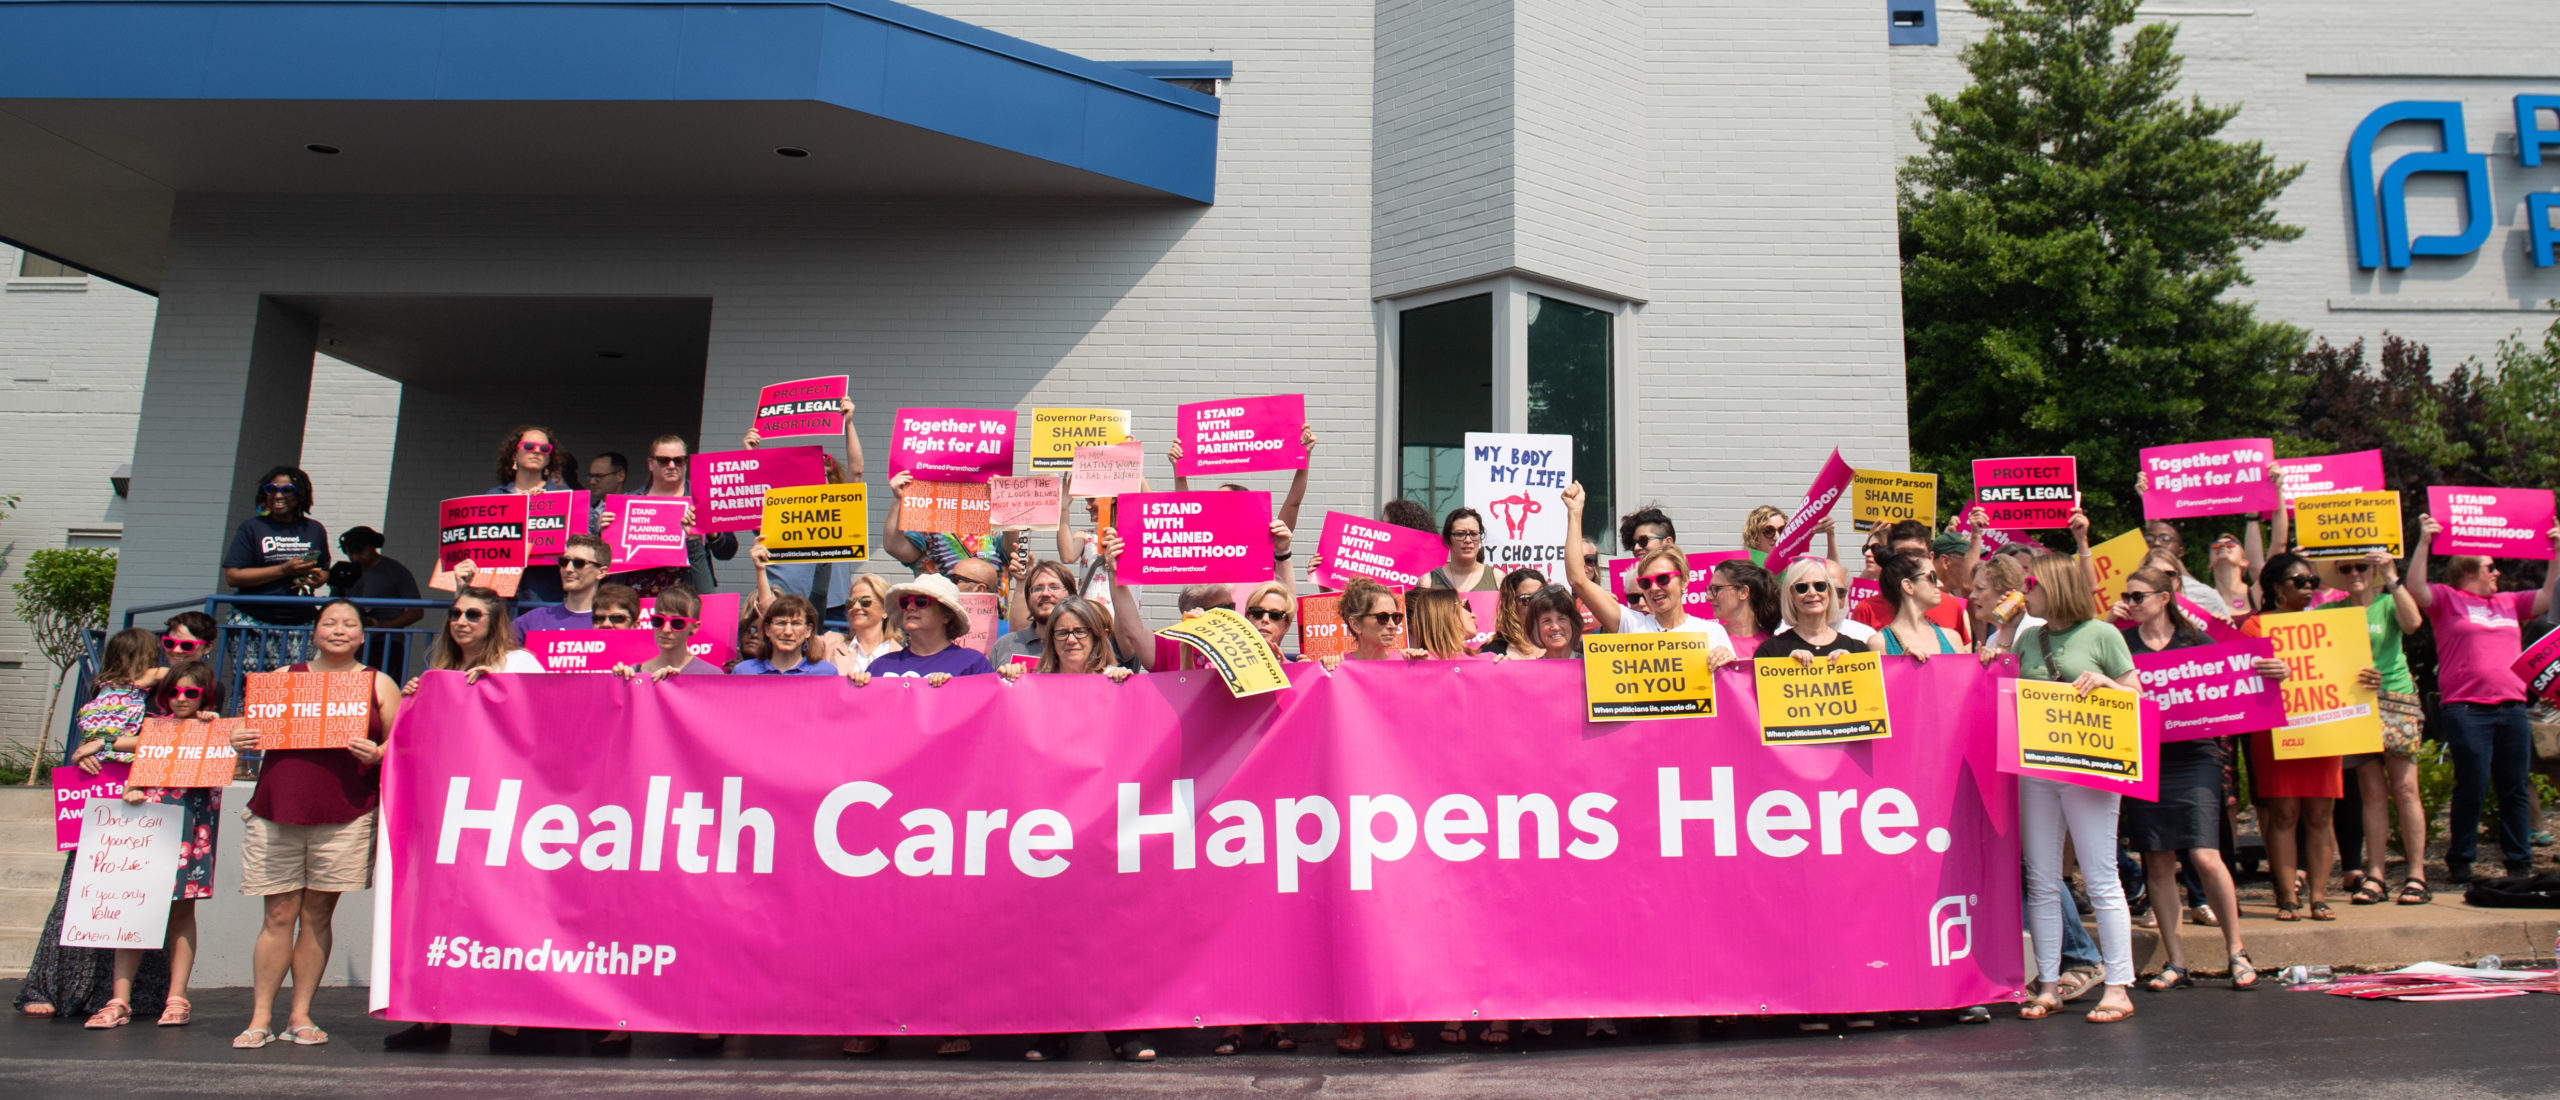 Pro-choice supporters and staff of Planned Parenthood hold a rally outside the Planned Parenthood Reproductive Health Services Center in St. Louis, Missouri, May 31, 2019, the last location in the state performing abortions. - A US Court on May 31, 2019 blocked Missouri from closing the clinic. 